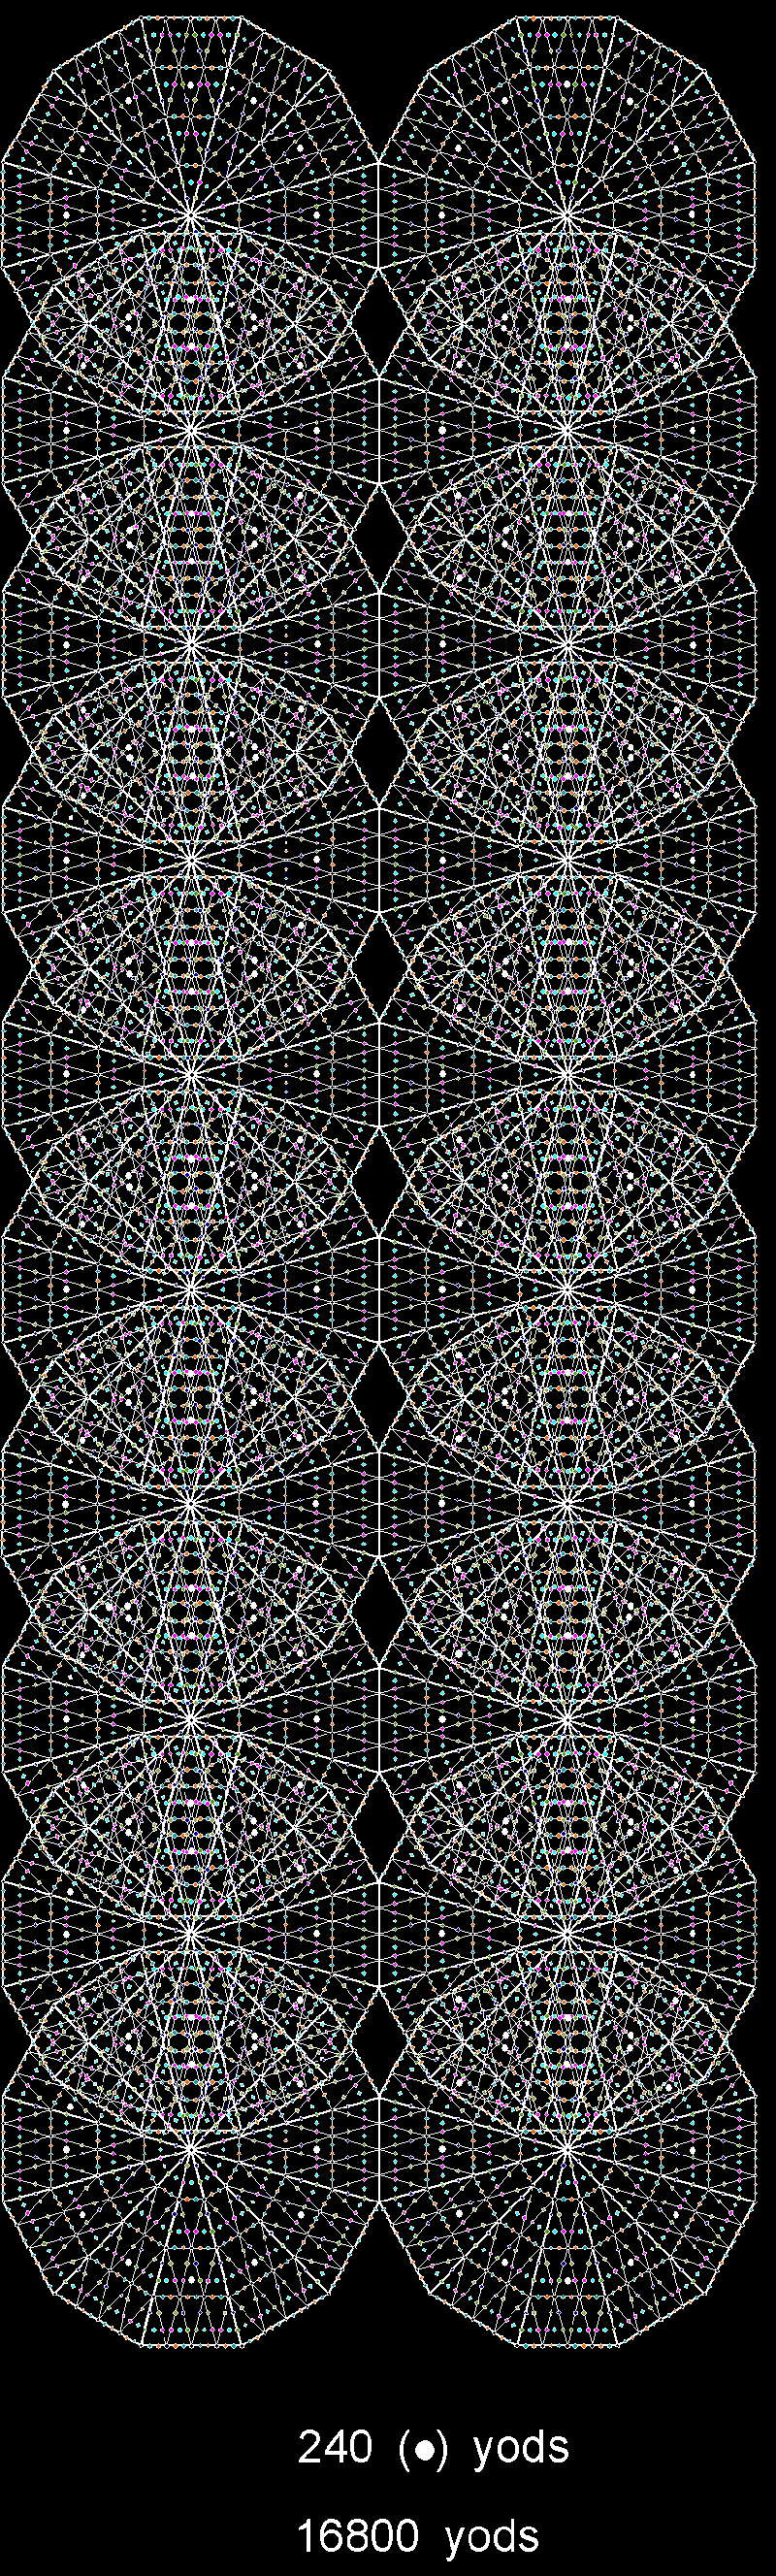 16800 yods surround centres of 240 2nd-order tetractyses in 20 enfolded ddodecagons